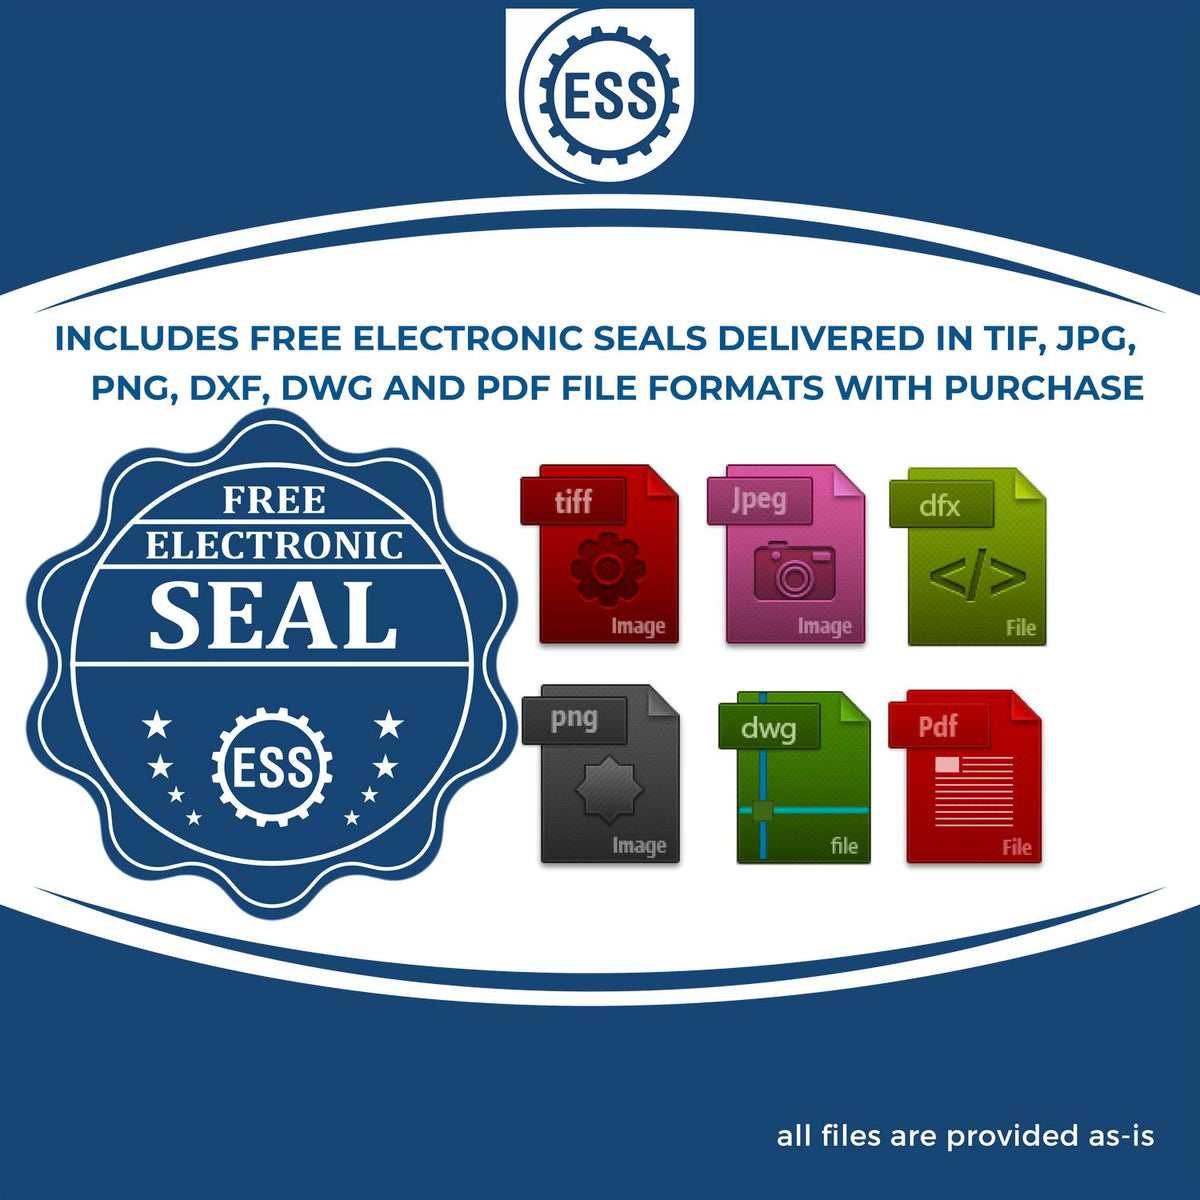 An infographic for the free electronic seal for the MaxLight Premium Pre-Inked Virginia State Seal Notarial Stamp illustrating the different file type icons such as DXF, DWG, TIF, JPG and PNG.